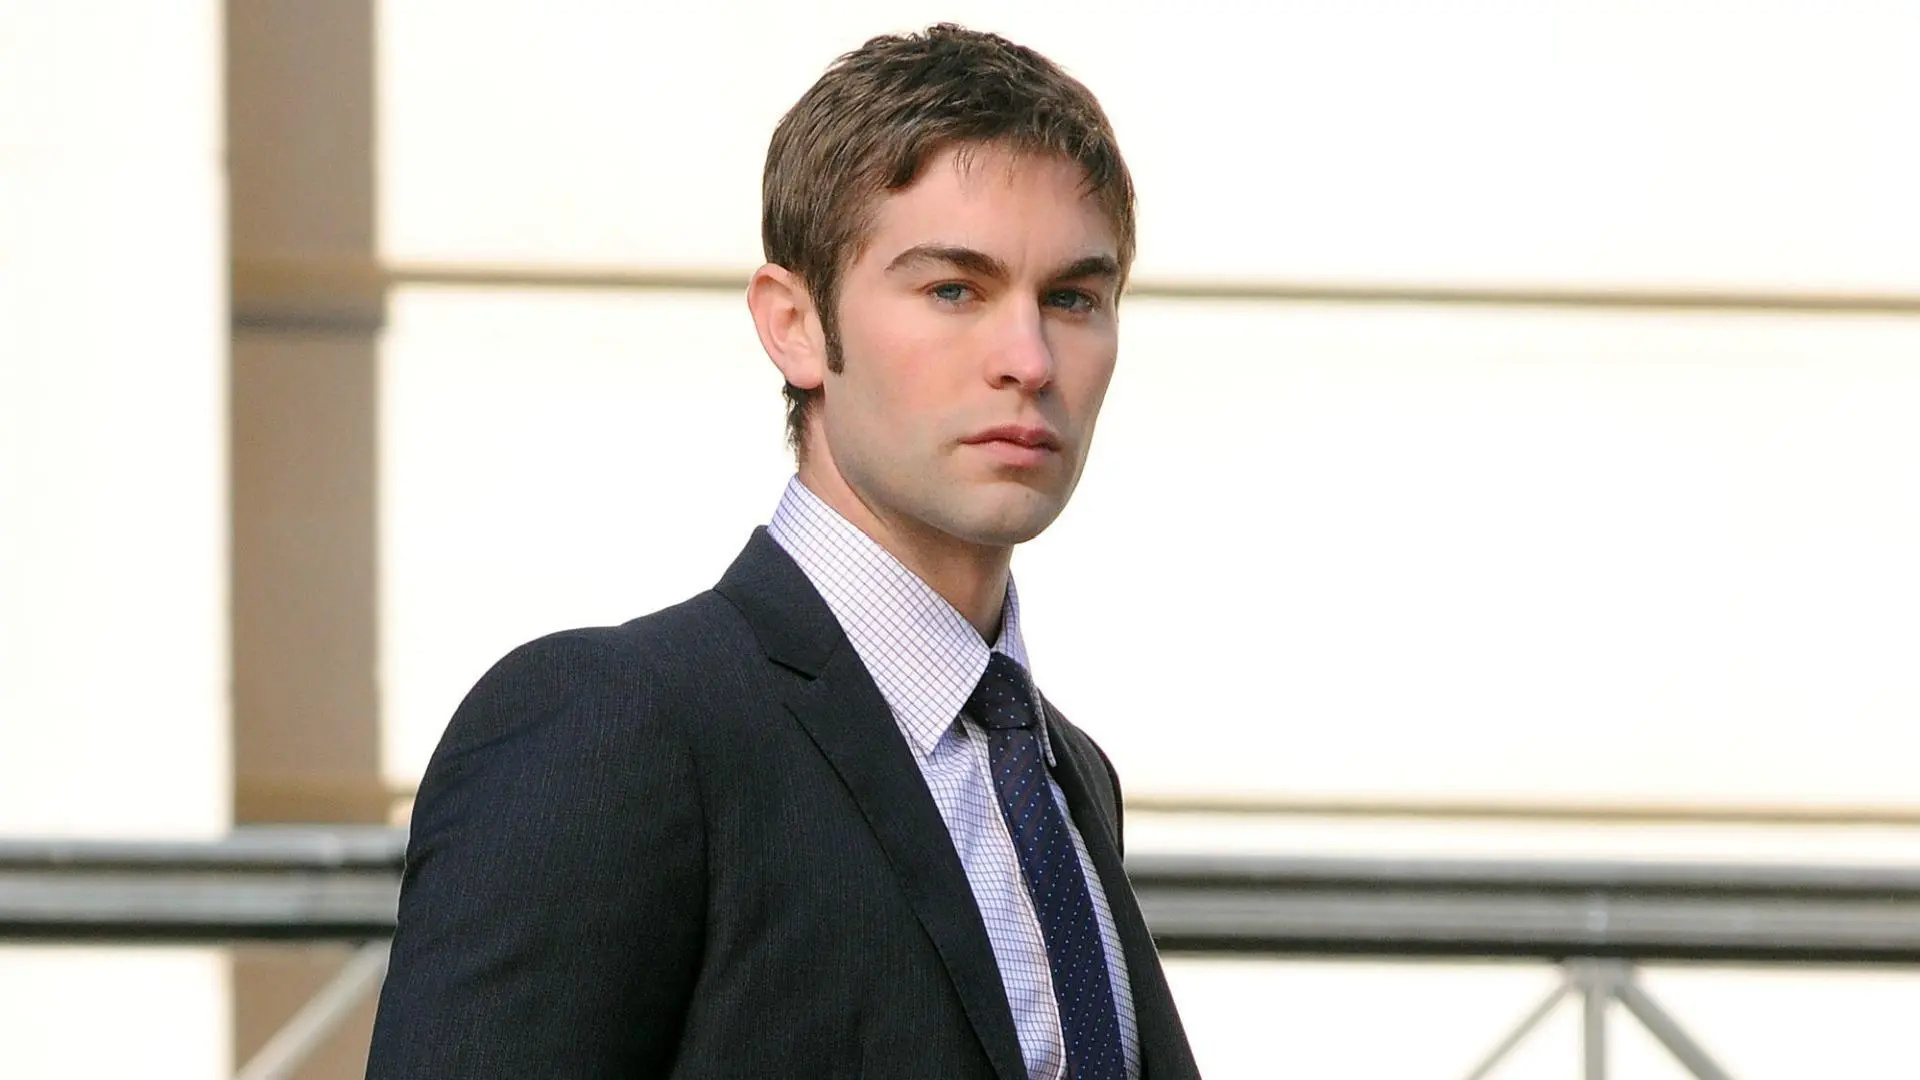 Chace Crawford: Nate Archibald, Gossip Girl, The primary male character in the novels written by Cecily von Ziegesar. 1920x1080 Full HD Background.